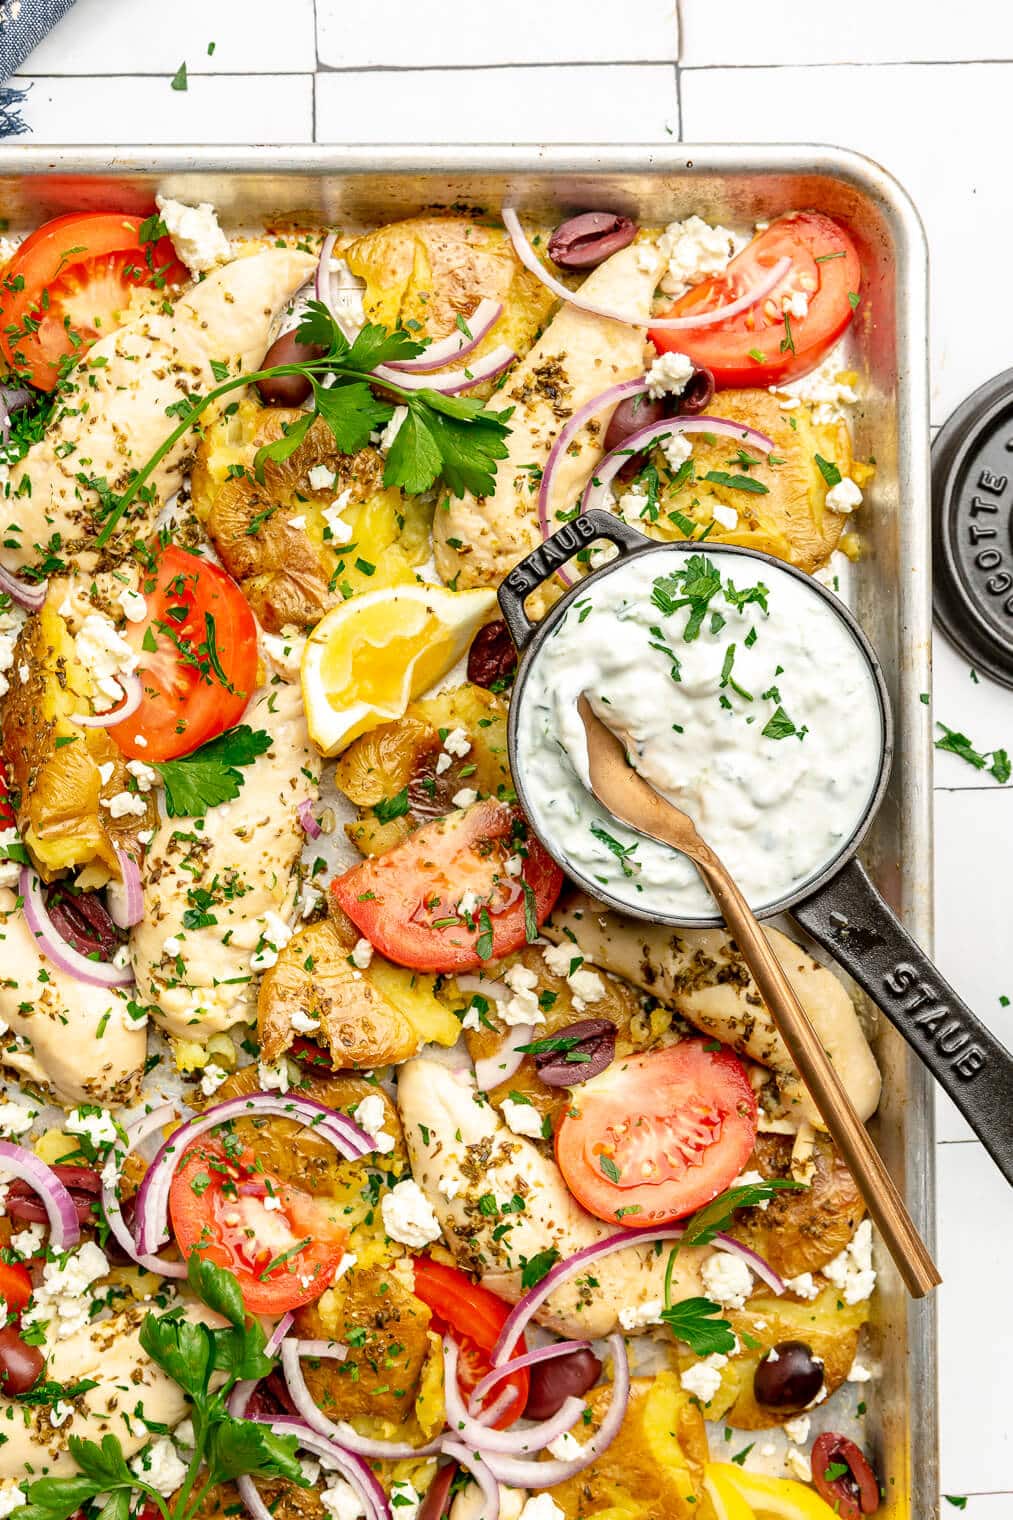 A Greek chicken sheet pan dinner with potatoes, chicken tenders, tomatoes, red onion, olives, and feta cheese.